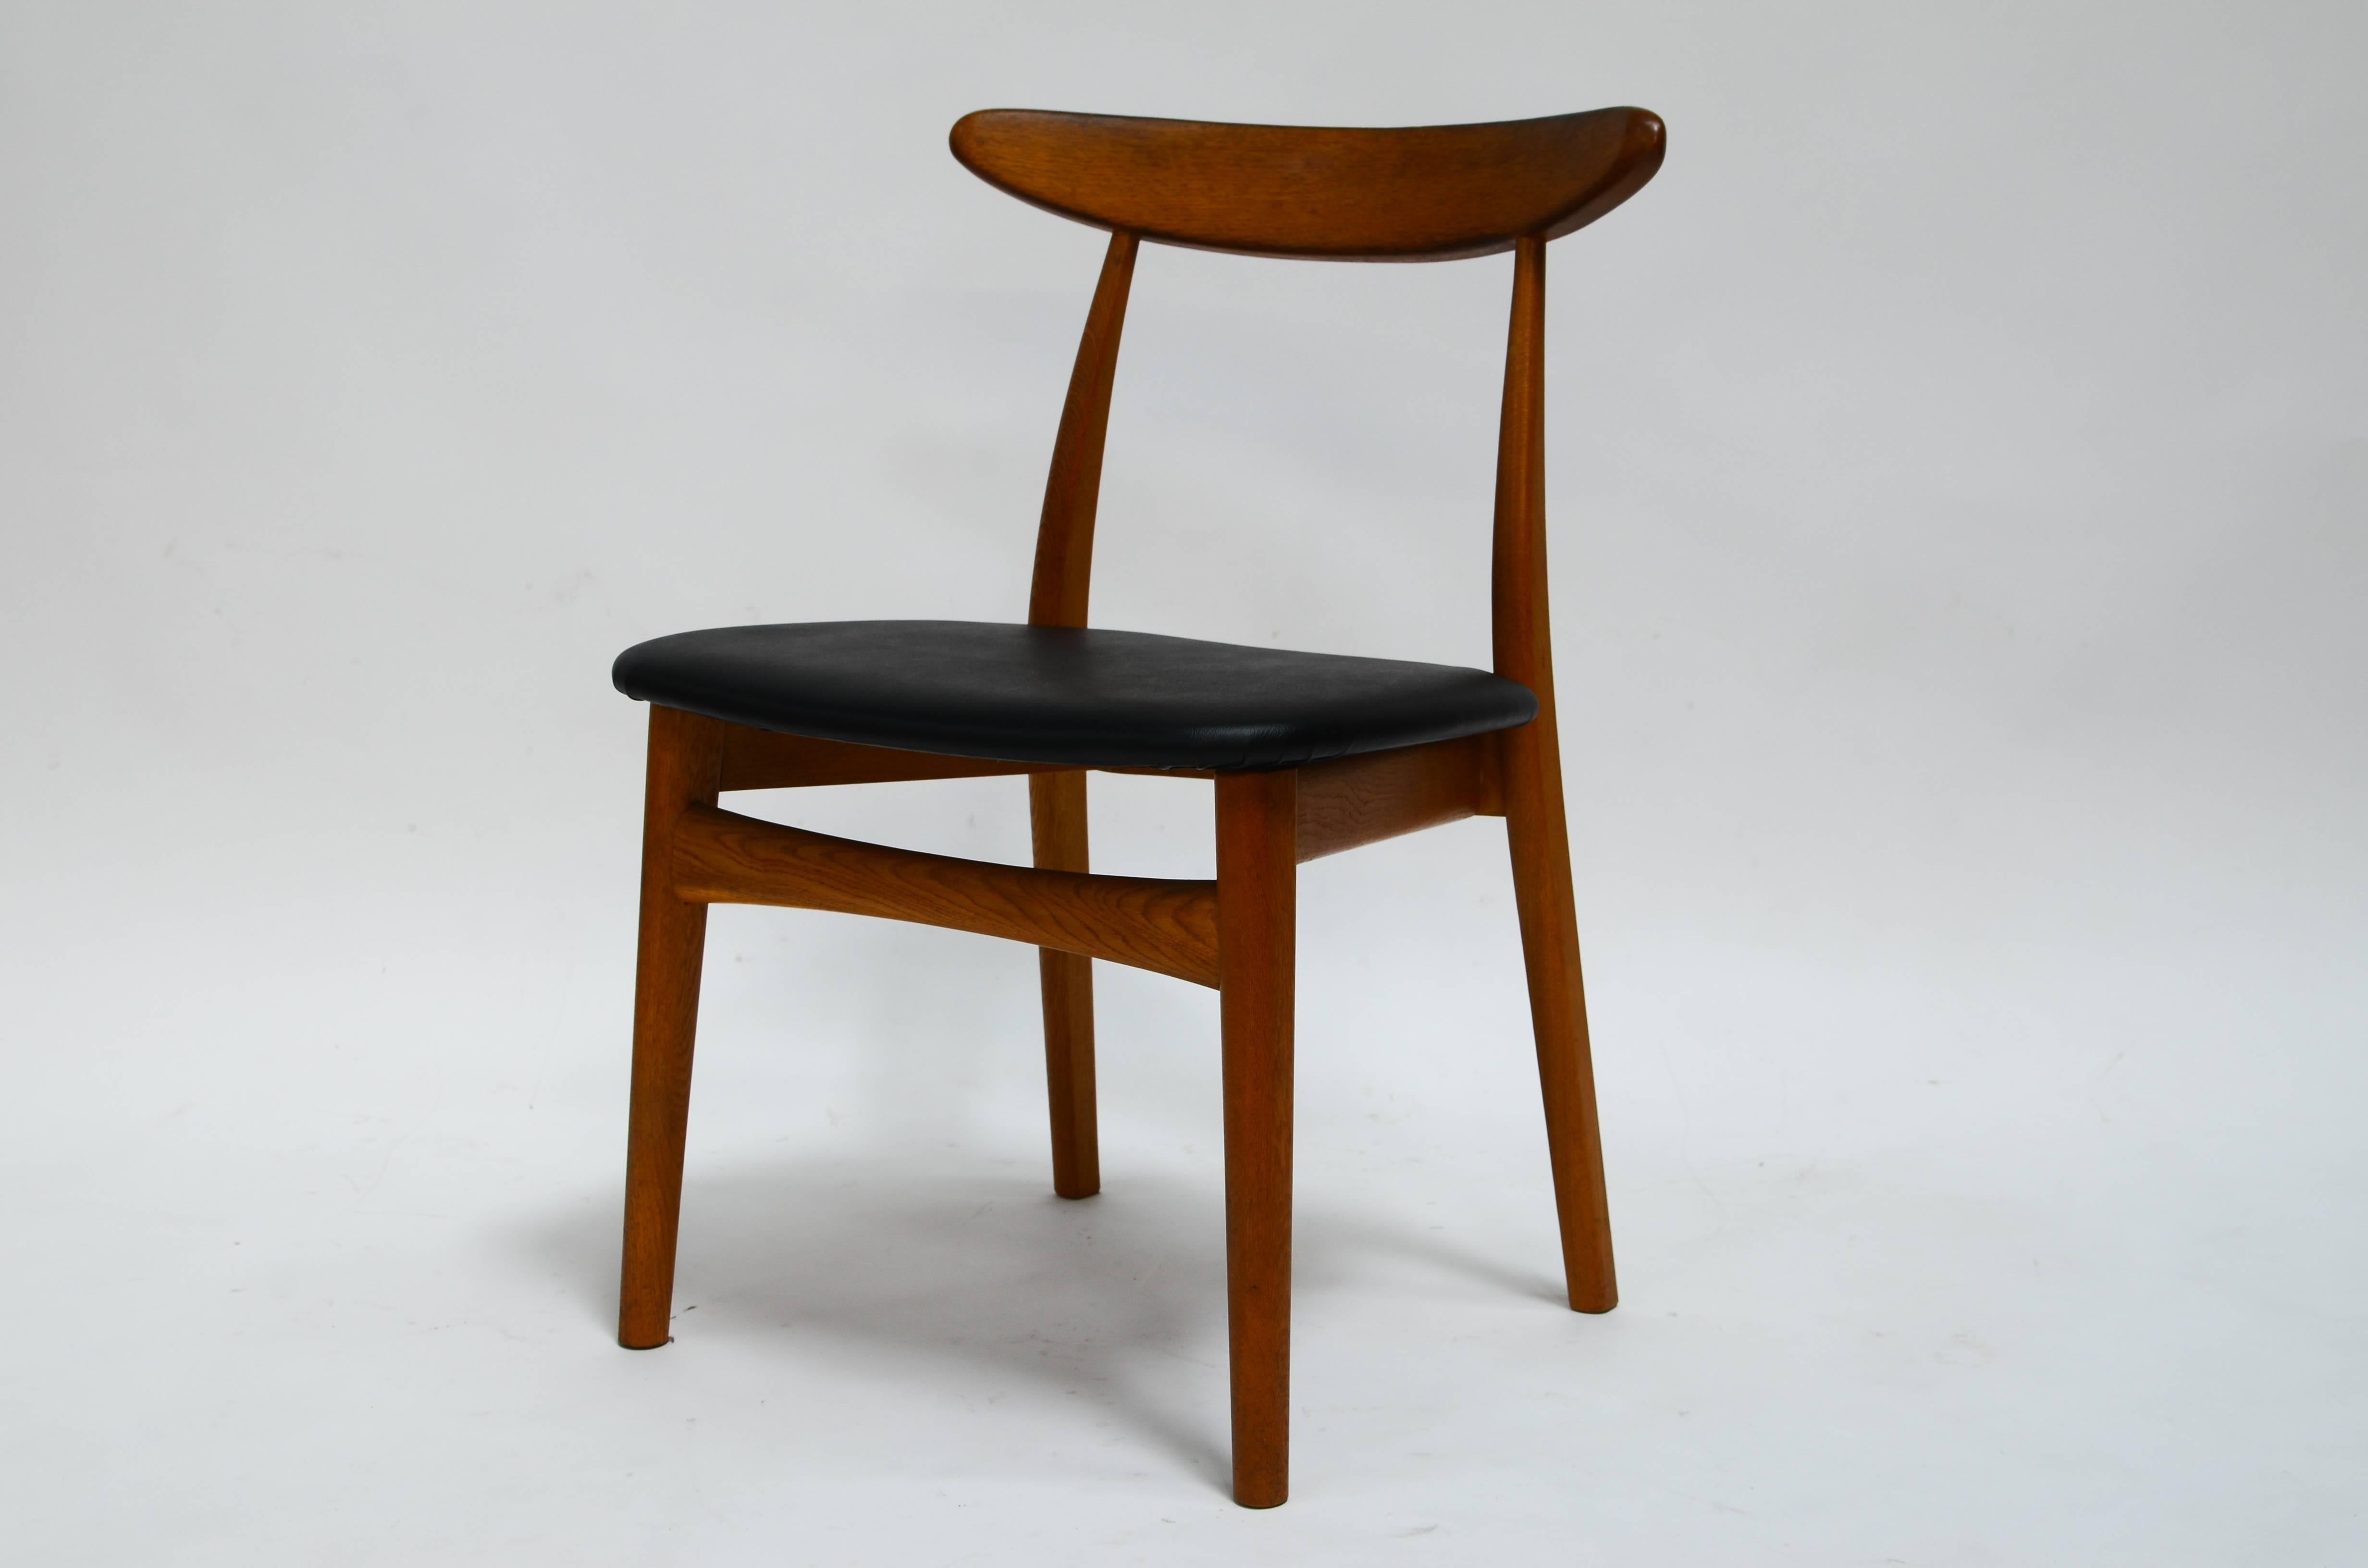 Japanese Modern Midcentury Dining Chairs  In Good Condition For Sale In Berkeley, CA